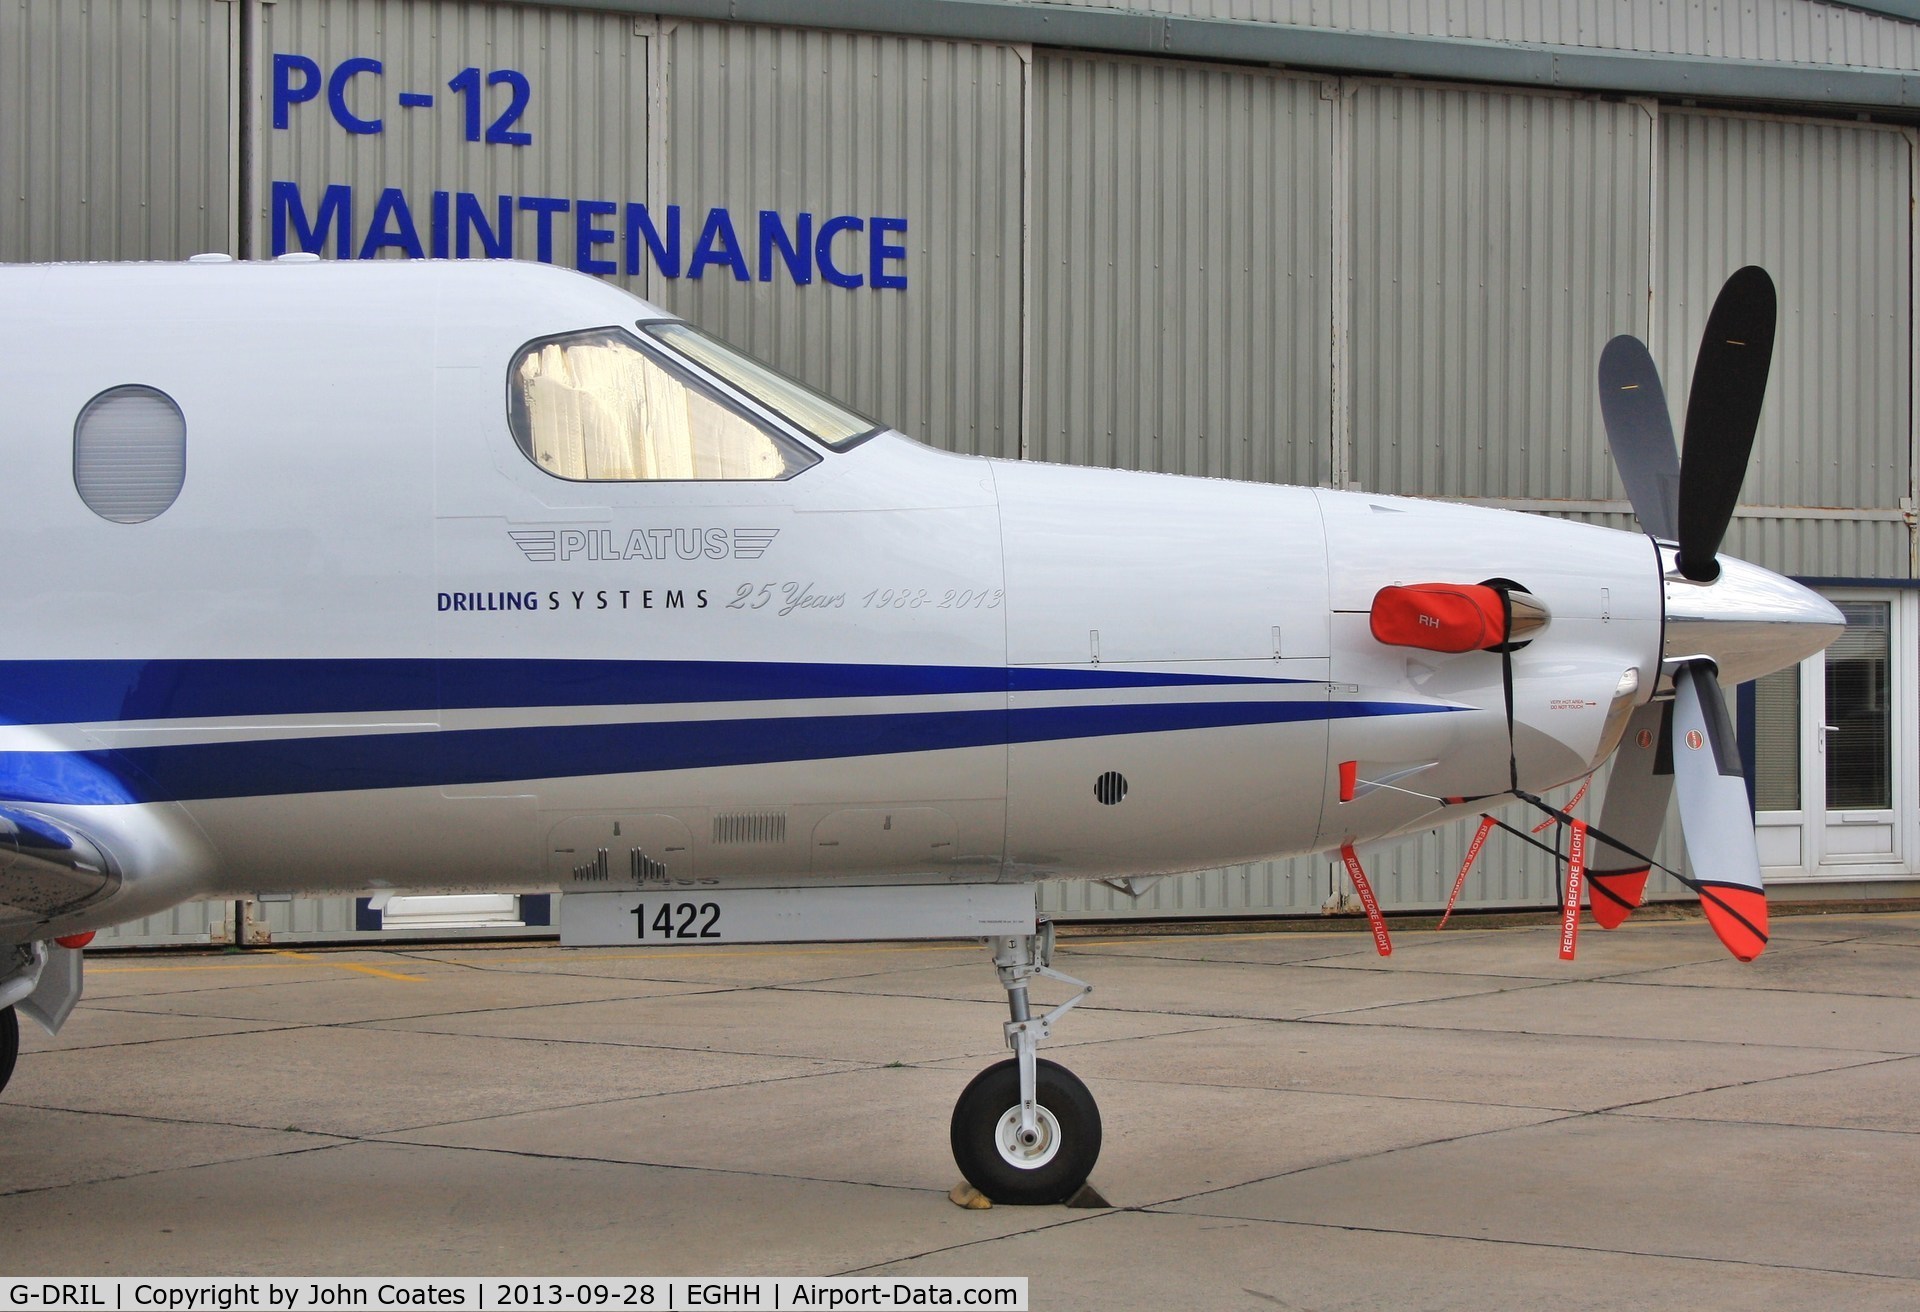 G-DRIL, 2013 Pilatus PC-12/47E C/N 1422, New resident and replacement for M-DRIL
25 years logo and 